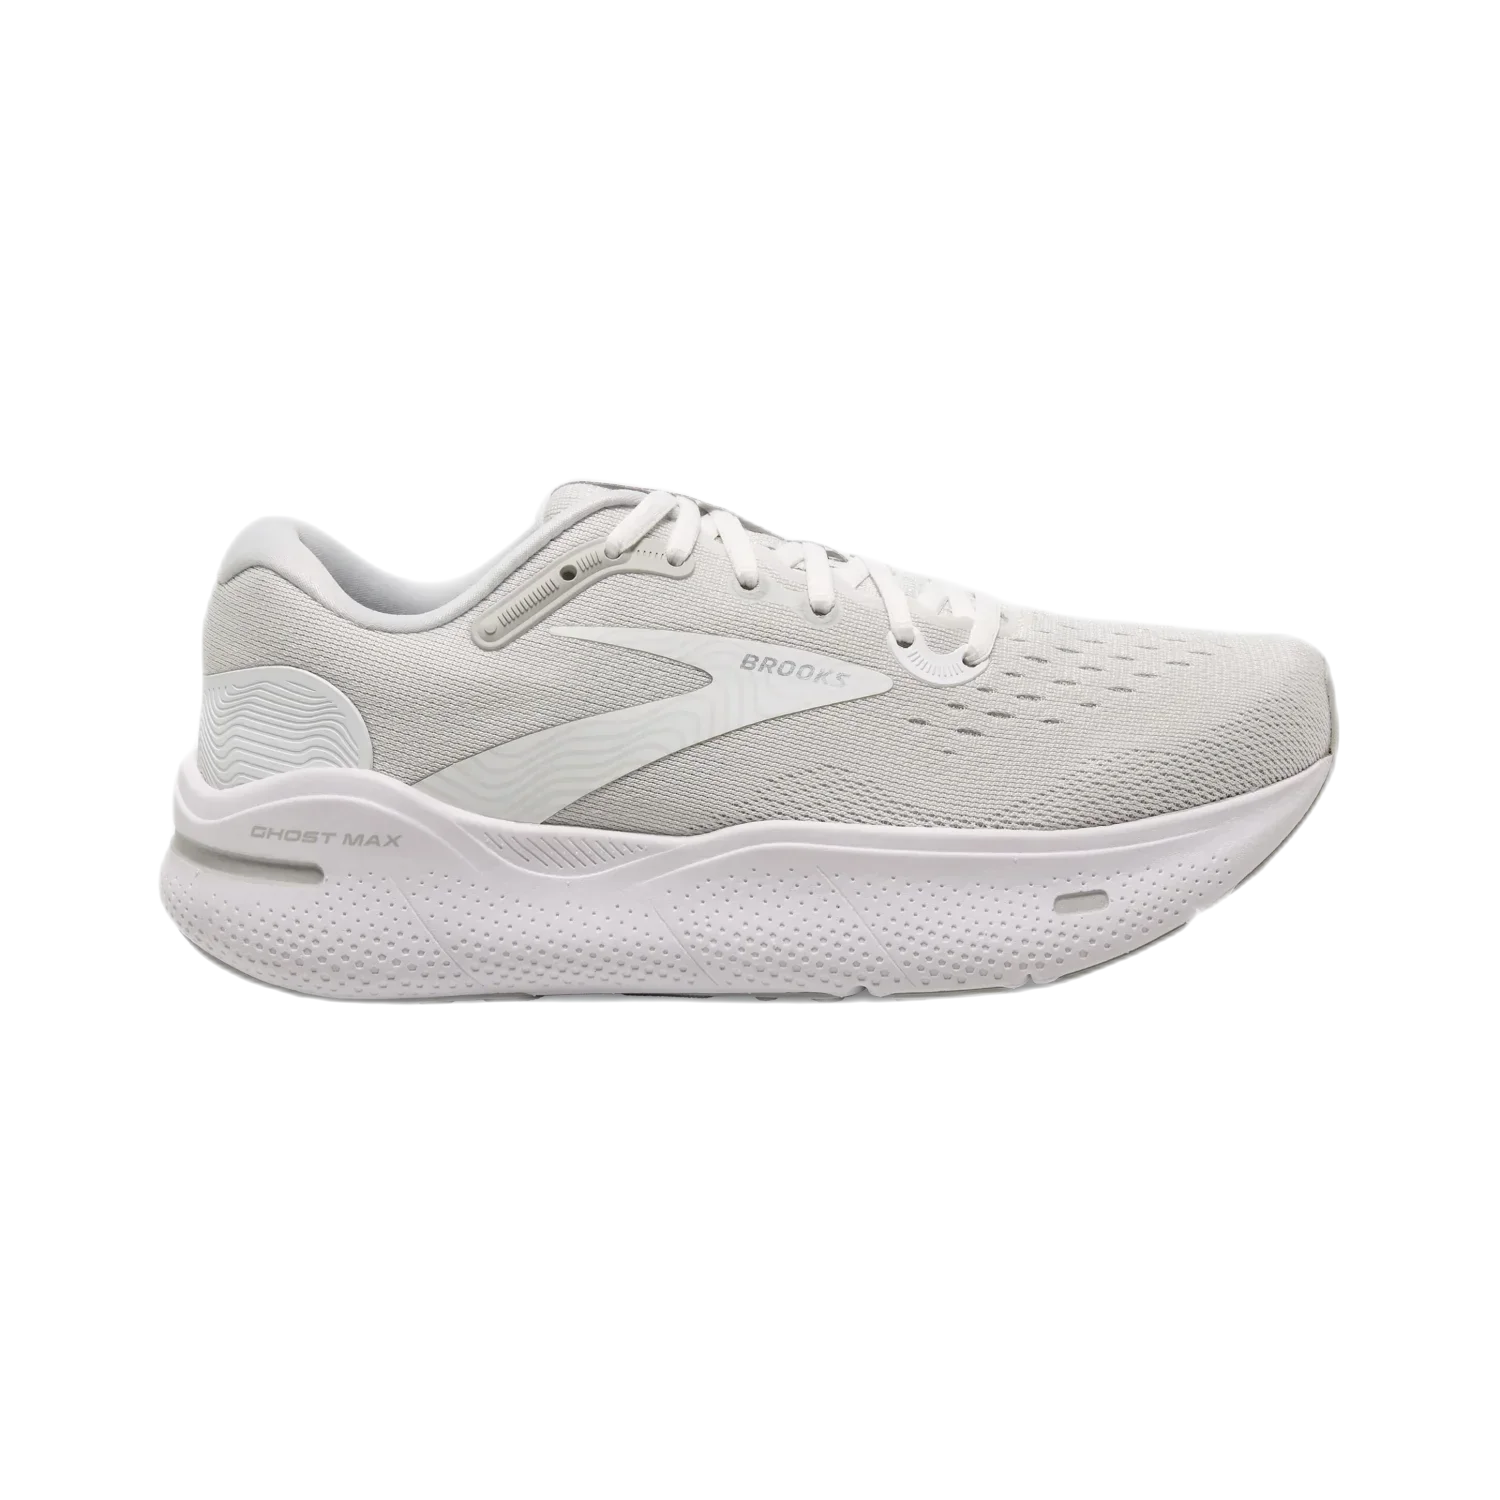 Brooks Running 12. SHOES - WOMENS RUNNING SHOE Women's Ghost Max WHITE|OYSTER|METALLIC SILVER